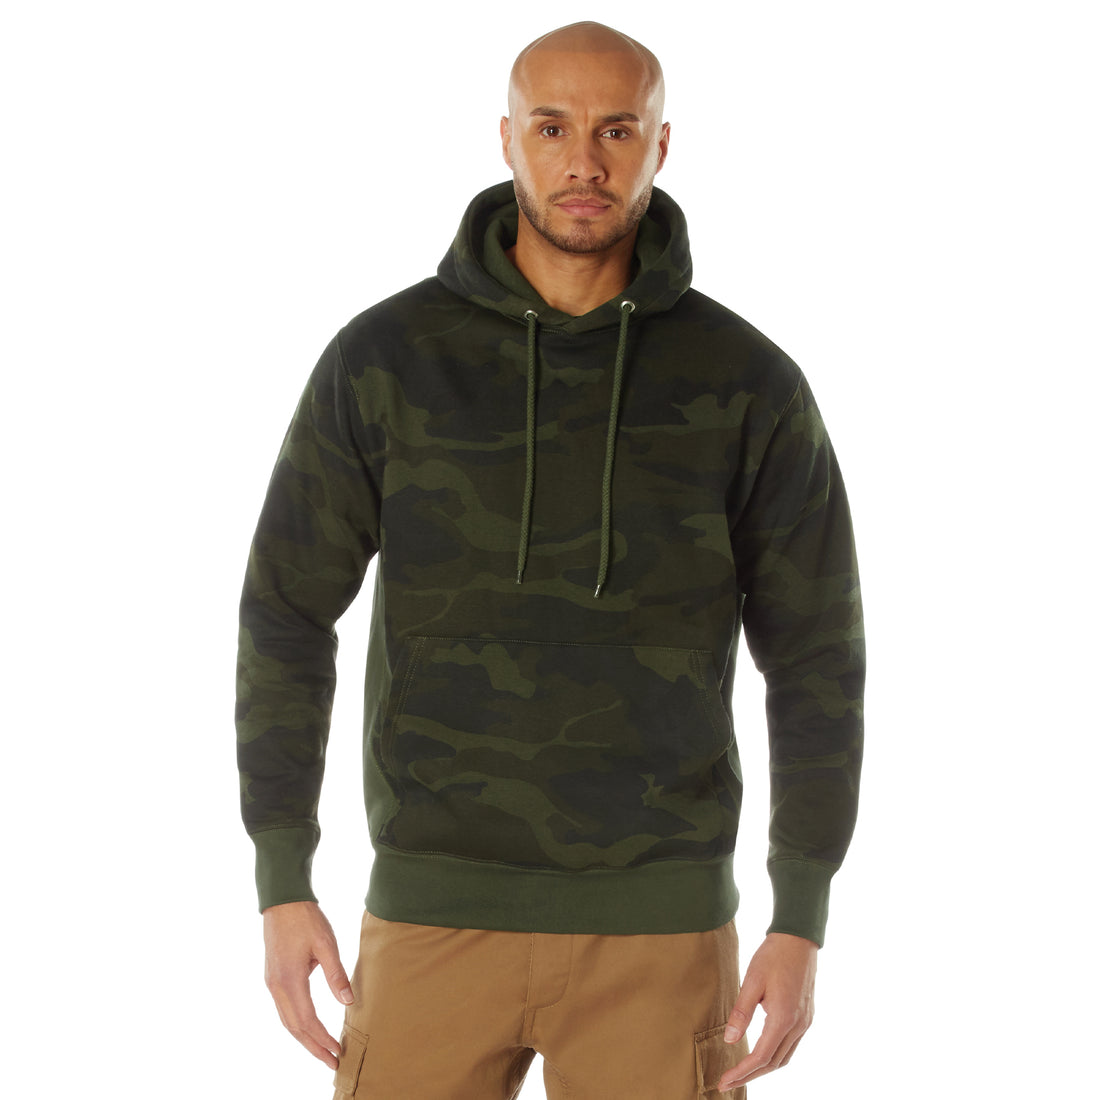 Rothco Every Day Pullover Hooded Sweatshirt in Midnight Woodland Camo!